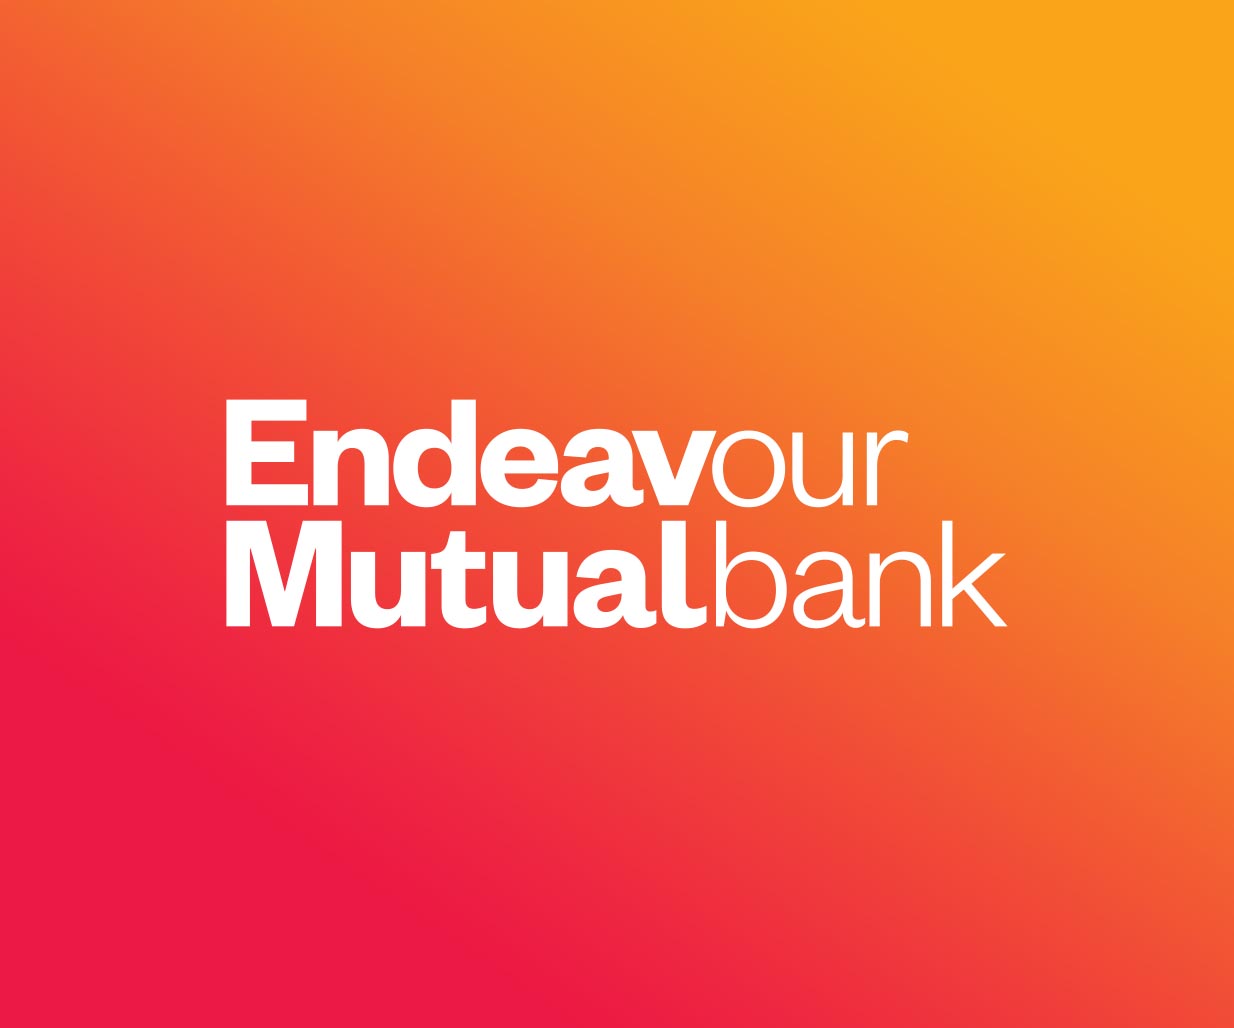 Rebranding, Brand Identity Design & Roll-out project for financial services company, Endeavour Mutual Bank, Sydney, Australia, image A